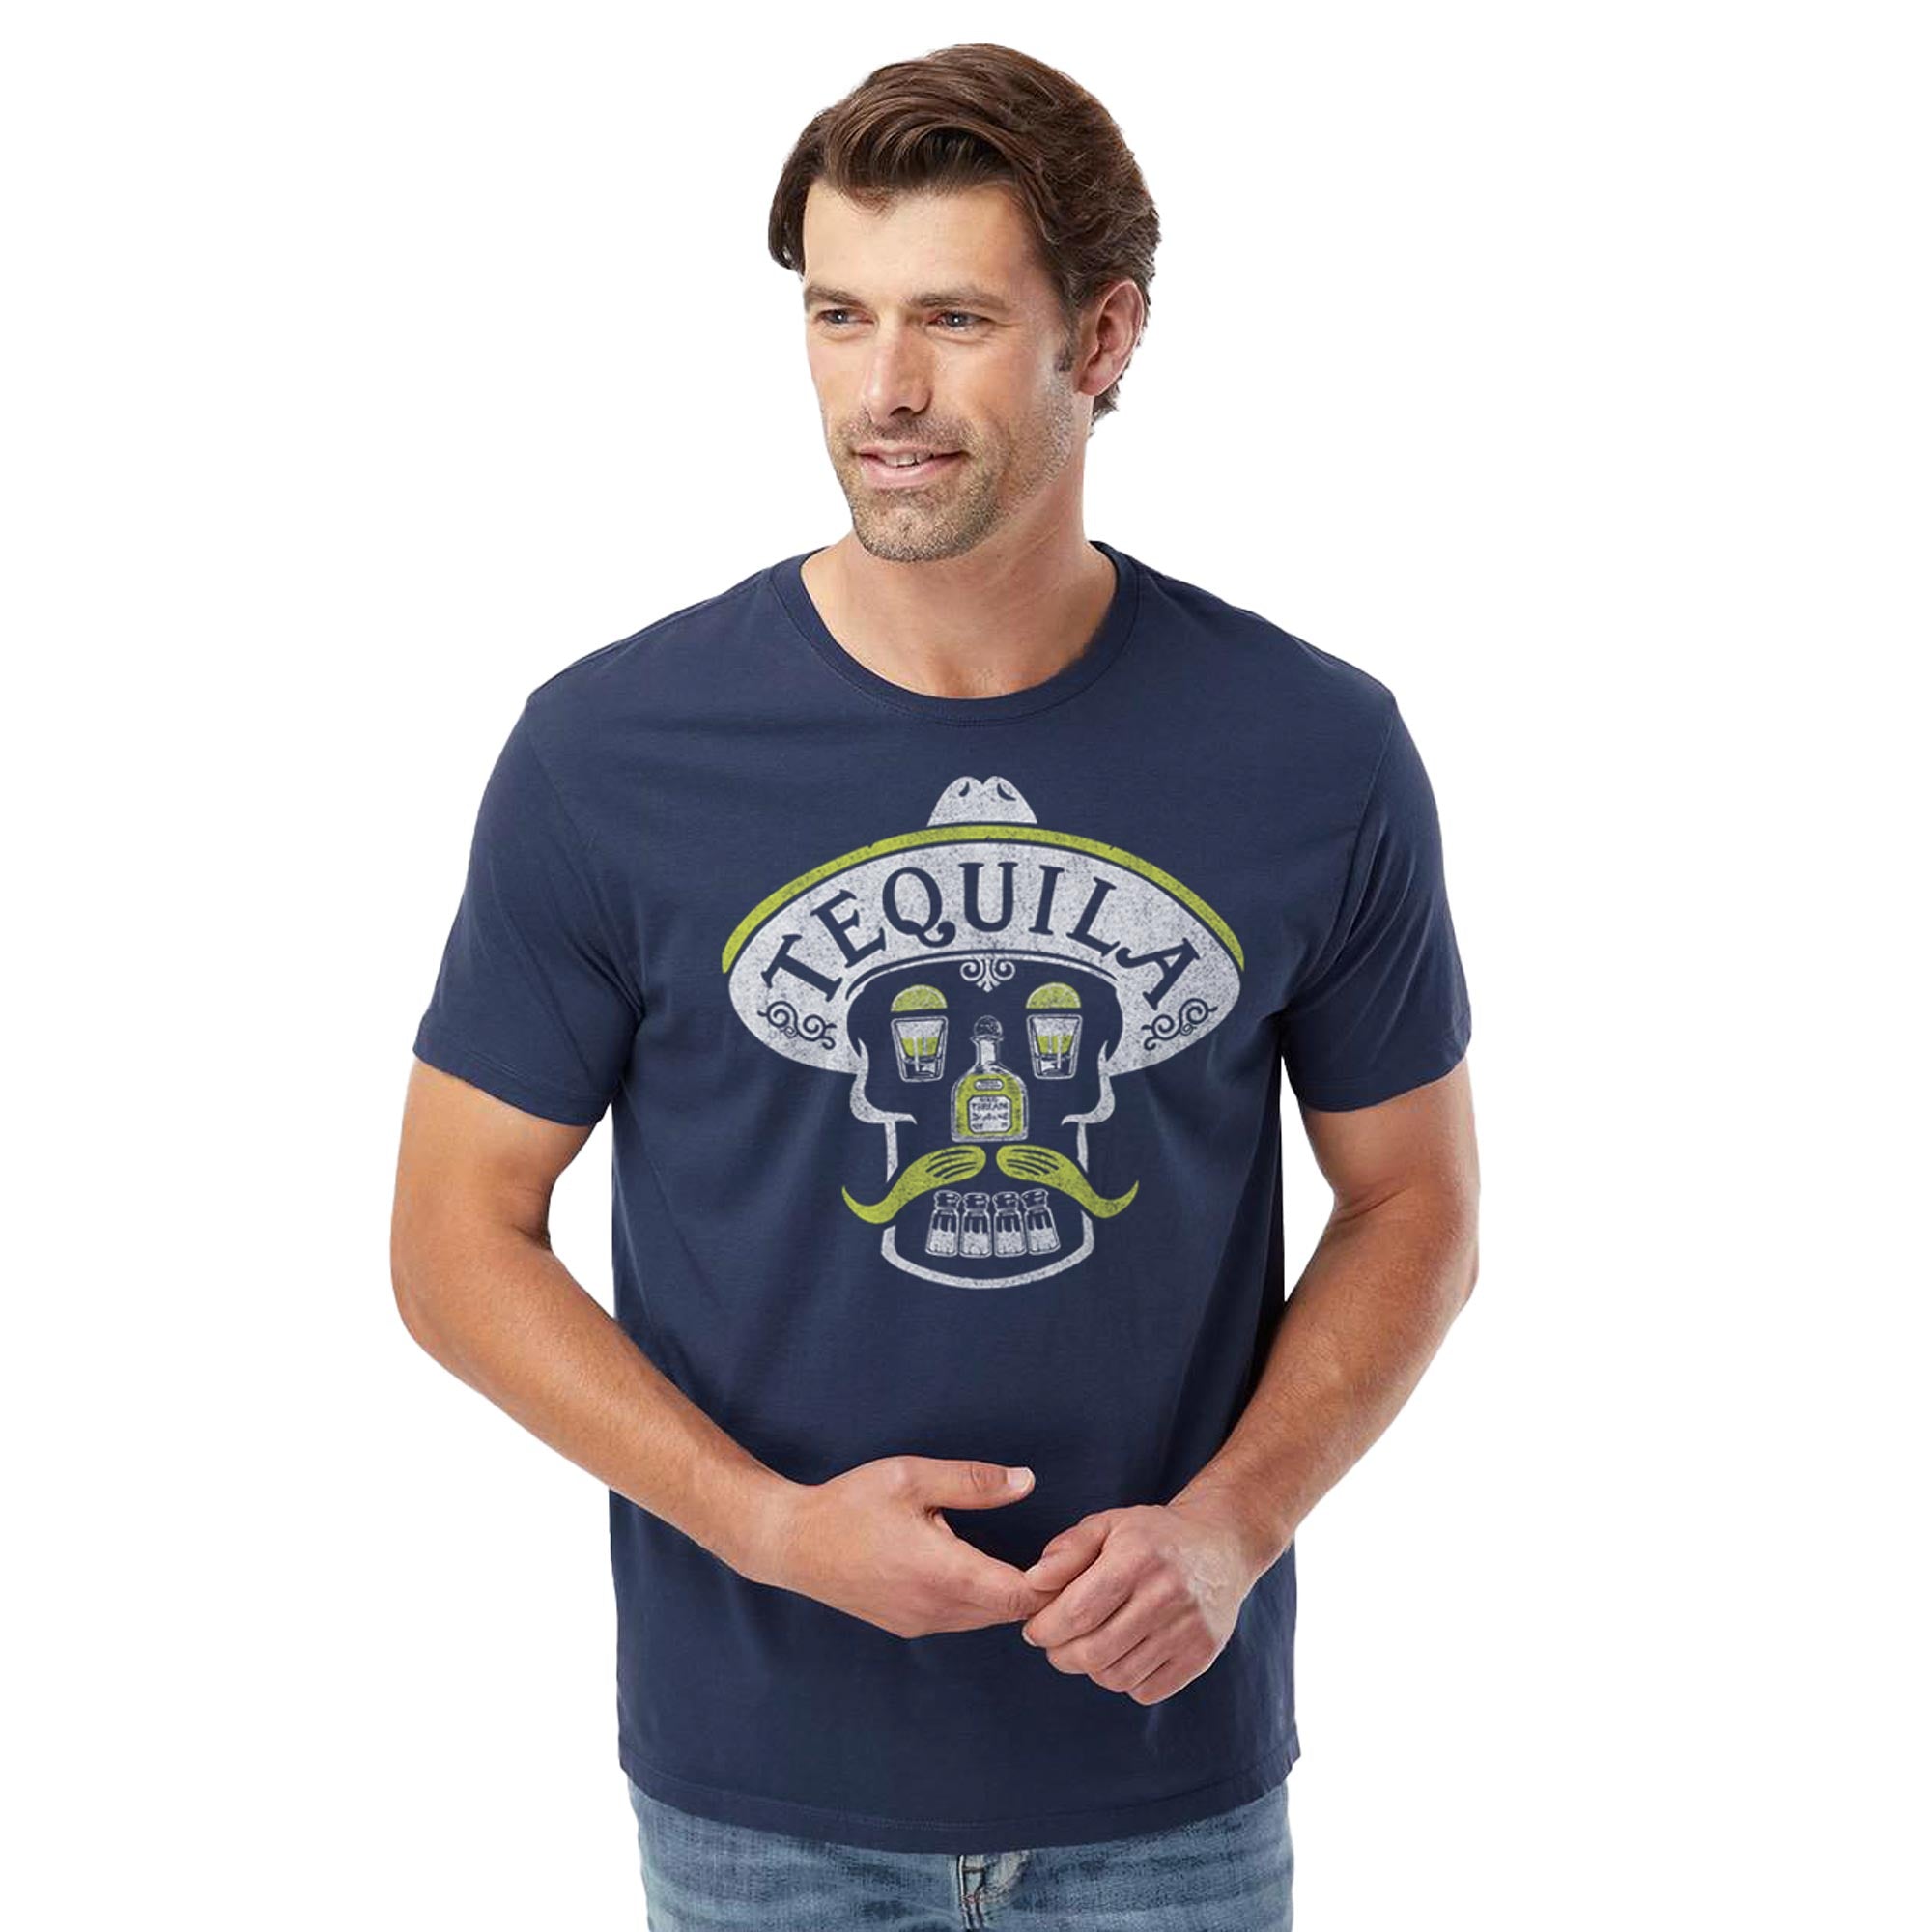 Tequila Skull Vintage Organic Cotton T-shirt | Cool Drinking Tee on Model | Solid Threads